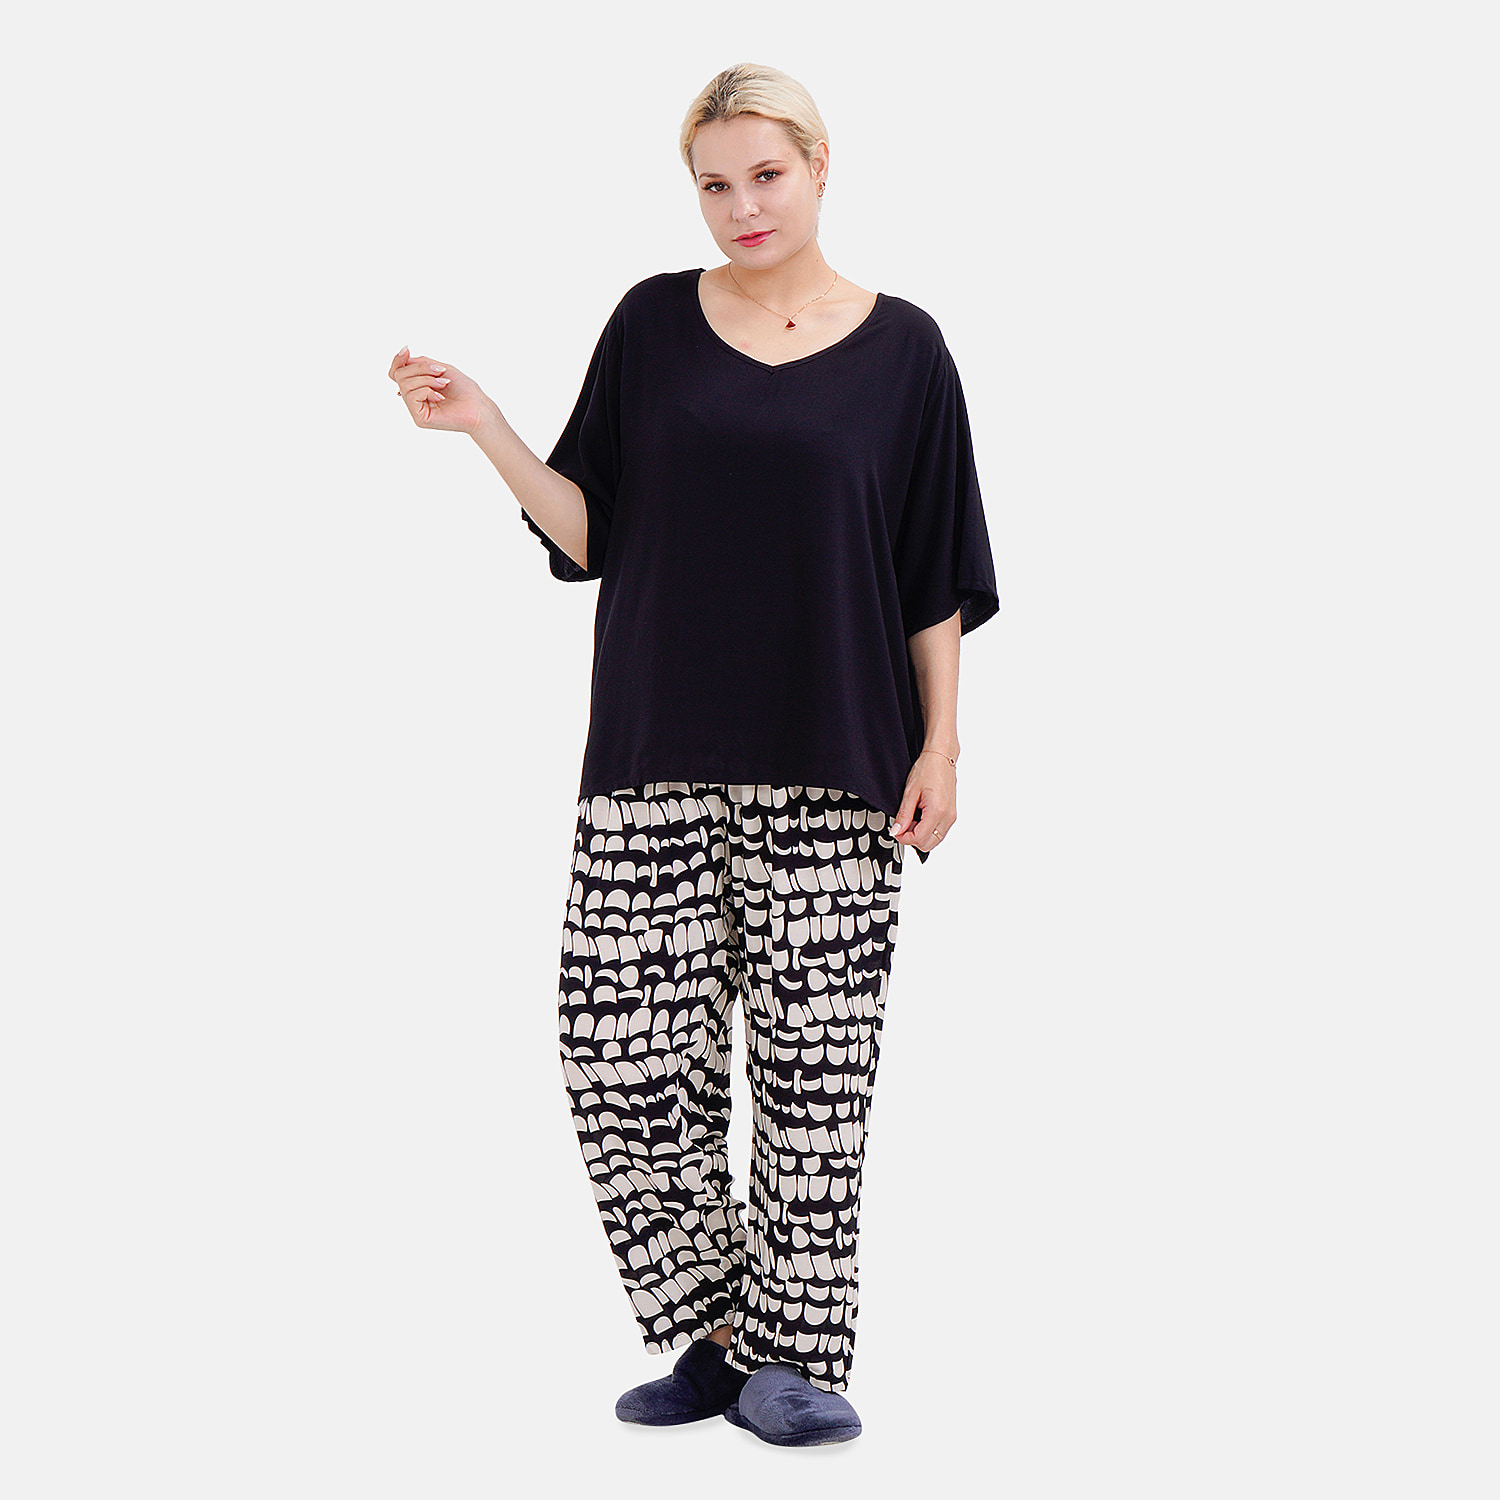 LA MAREY Loungewear Sets (Short Sleeves Top with Printed Trousers)  - Black (Size M)